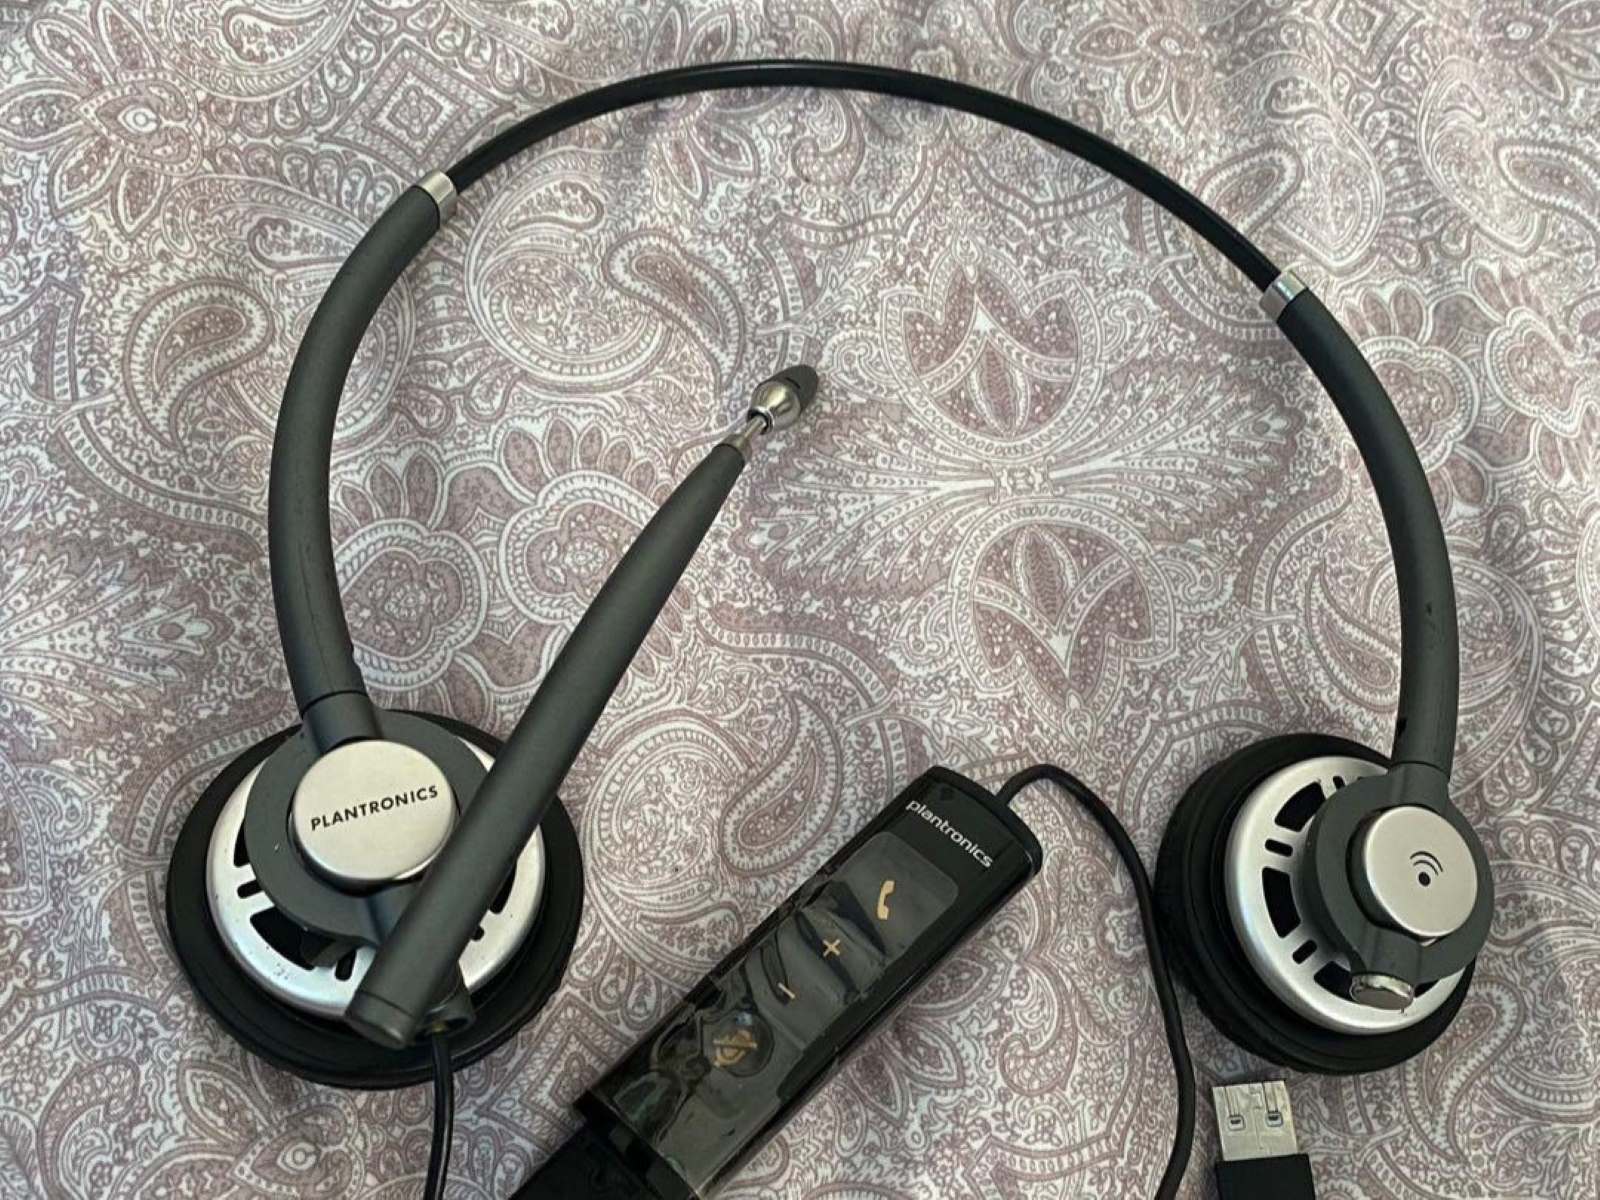 Fixing Beeping Issues In Plantronics Headsets